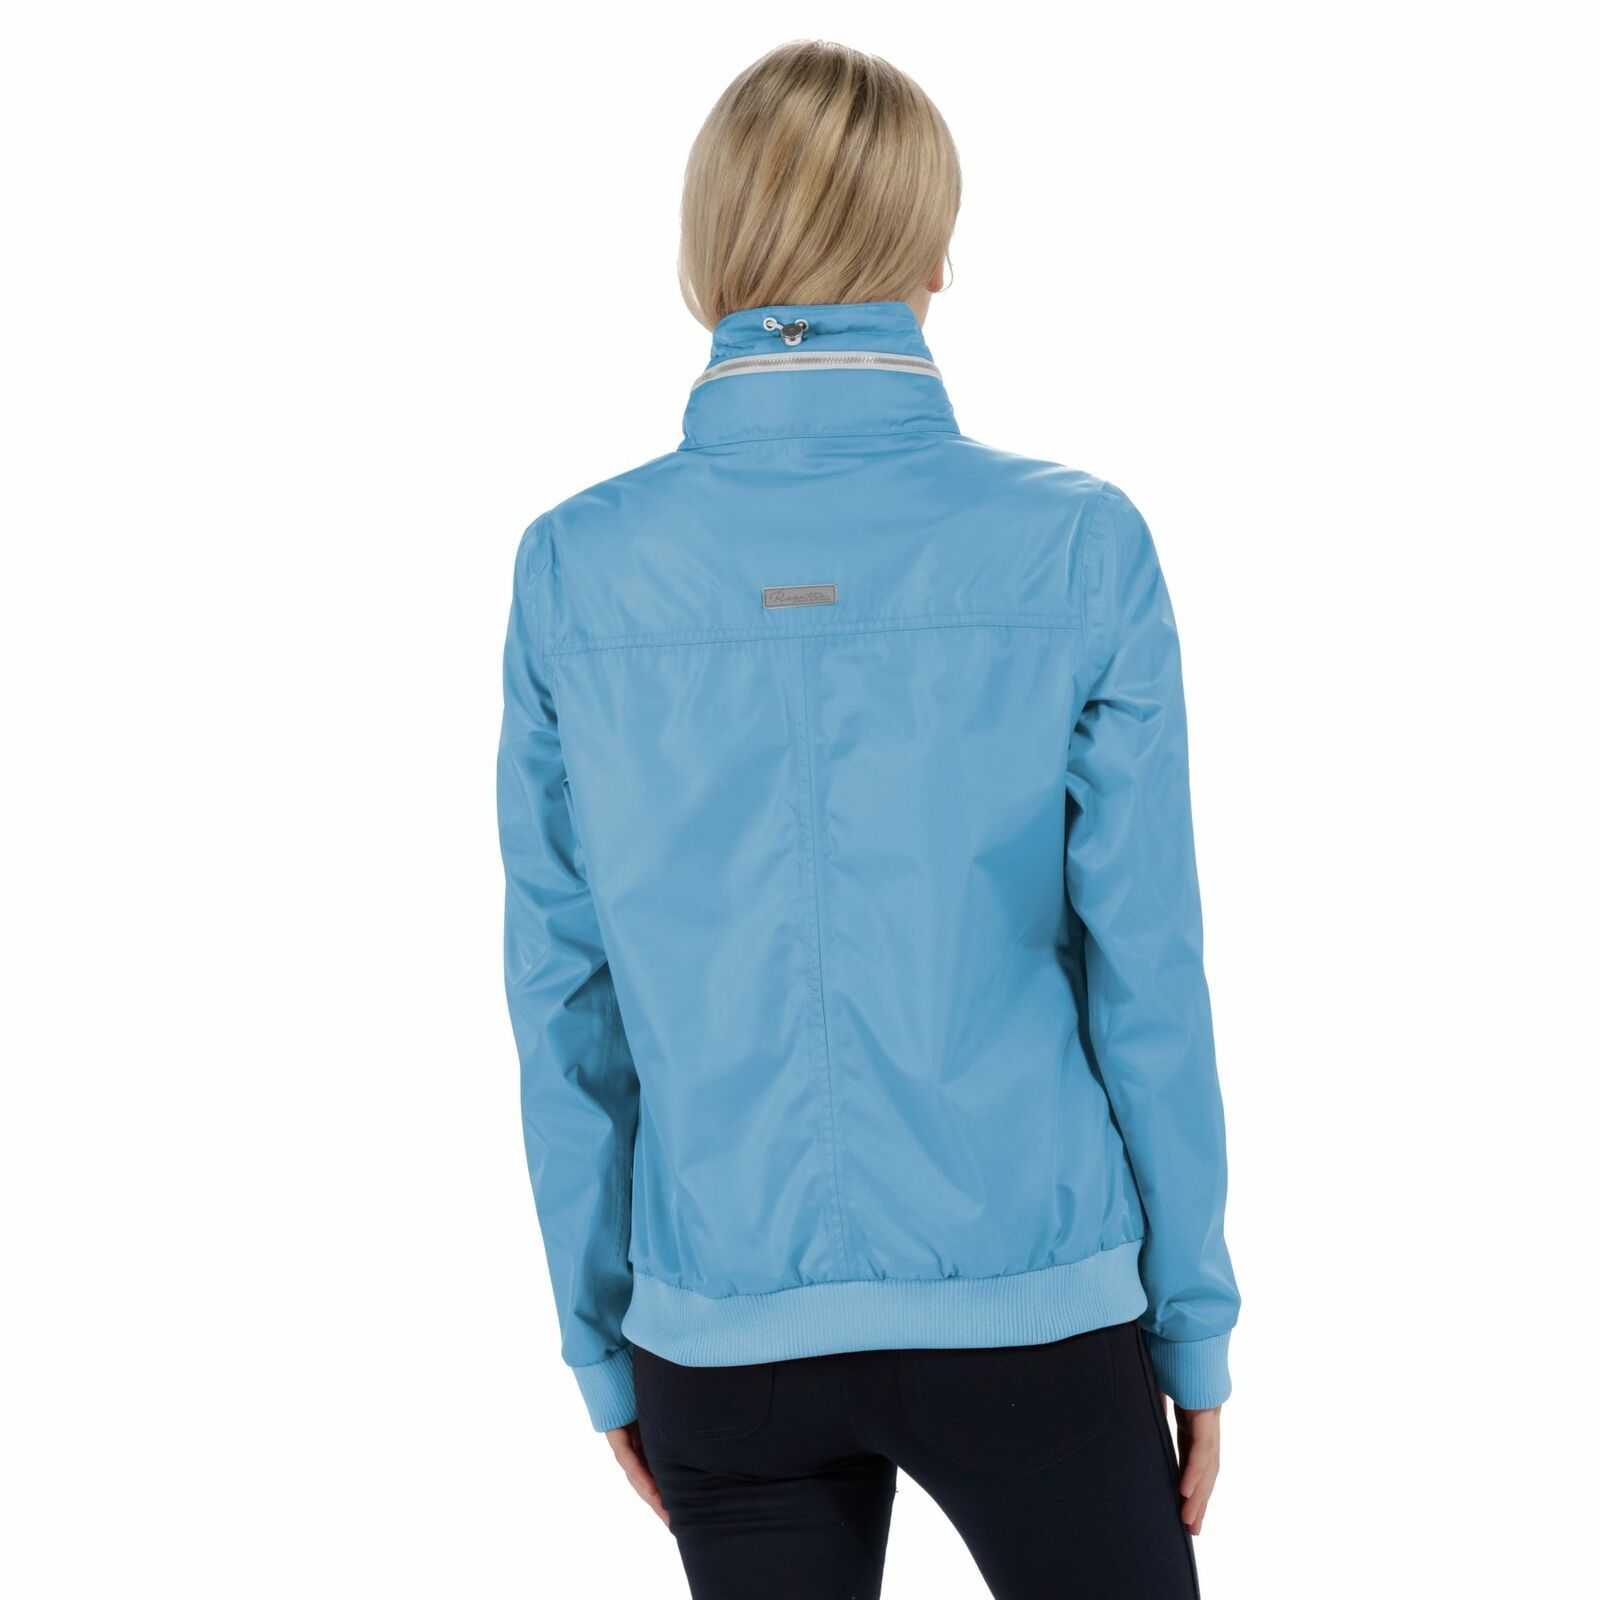 100% Polyester. The high-shine Kadisha bomber jacket is waterproof and breathable with a neat zip-away hood. This stylish summer cover up uses ISOTEX 5,000 fabric technology with sealed seams and a DWR (Durable Water Repellent) finish. With `rose gold` zips and poppers, ribbed fabric at the waist and cuffs for a shapely fit and a small Regatta badge on the hem. Regatta Womens sizing (bust approx): 6 (30in/76cm), 8 (32in/81cm), 10 (34in/86cm), 12 (36in/92cm), 14 (38in/97cm), 16 (40in/102cm), 18 (43in/109cm), 20 (45in/114cm), 22 (48in/122cm), 24 (50in/127cm), 26 (52in/132cm), 28 (54in/137cm), 30 (56in/142cm), 32 (58in/147cm), 34 (60in/152cm), 36 (62in/158cm).